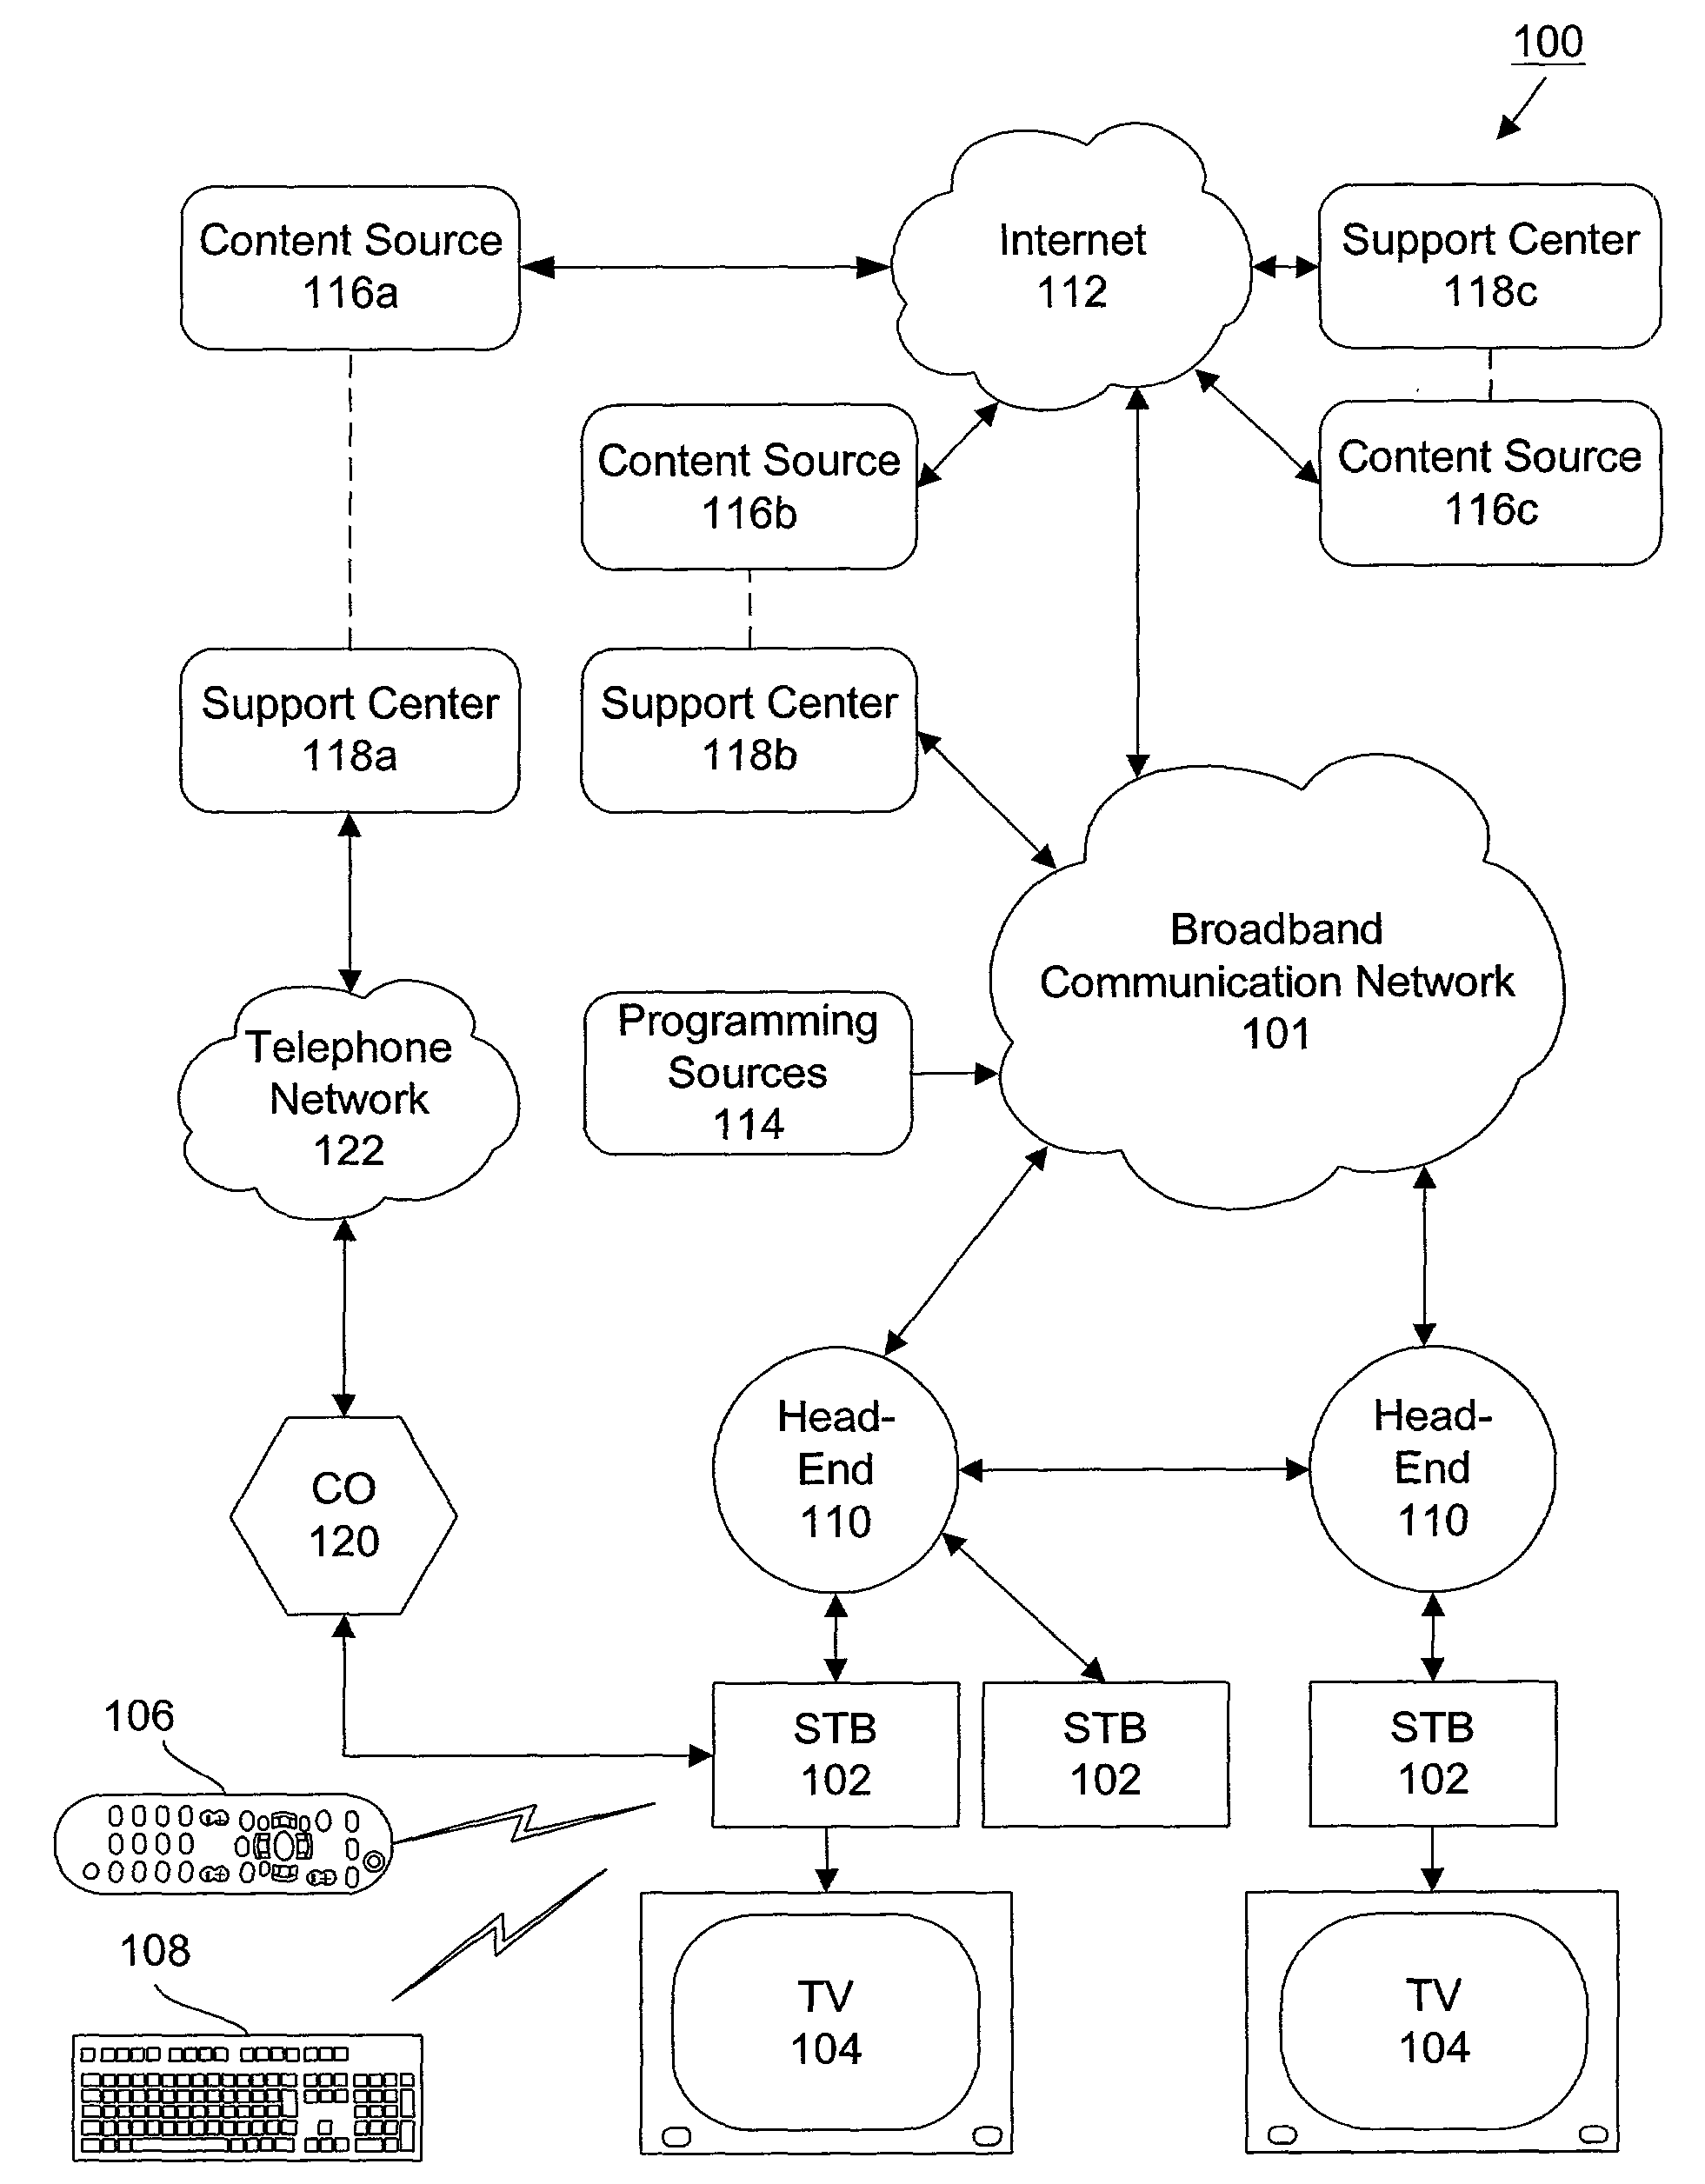 System and method for providing direct, context-sensitive customer support in an interactive television system